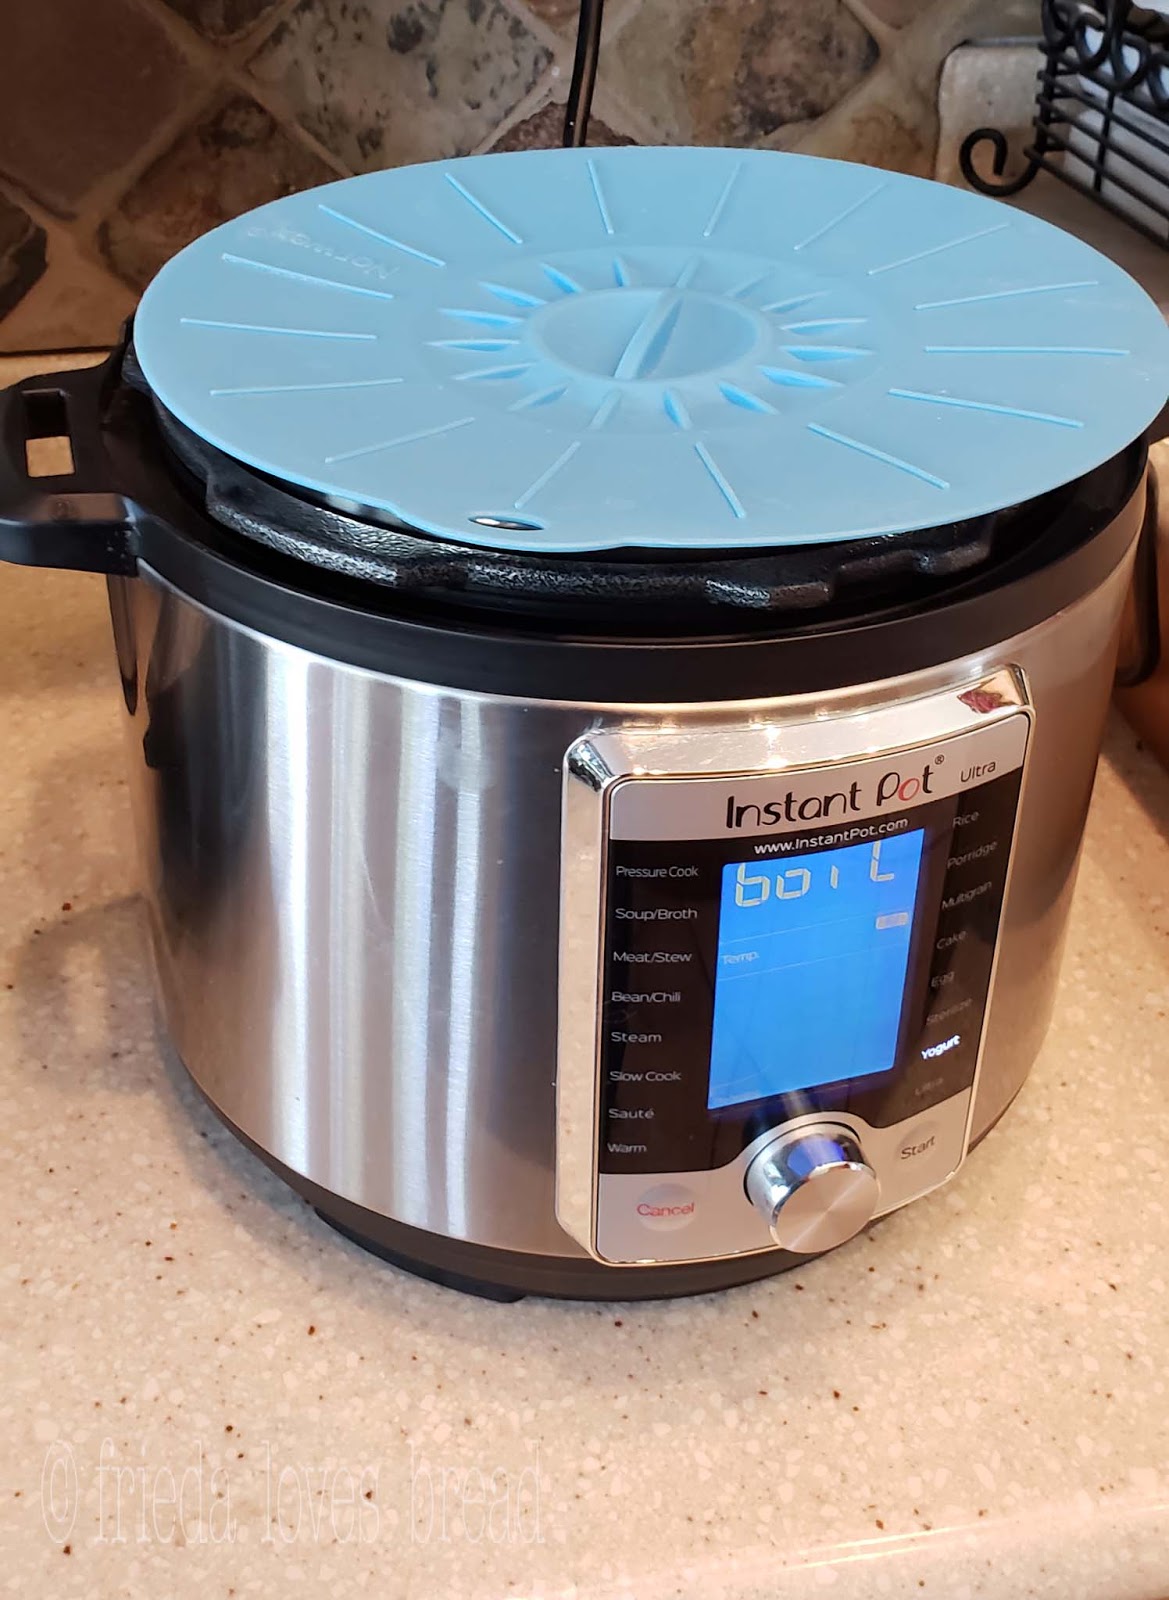 Frieda Loves Bread: Instant Pot Max Pressure Cooker - What's New?